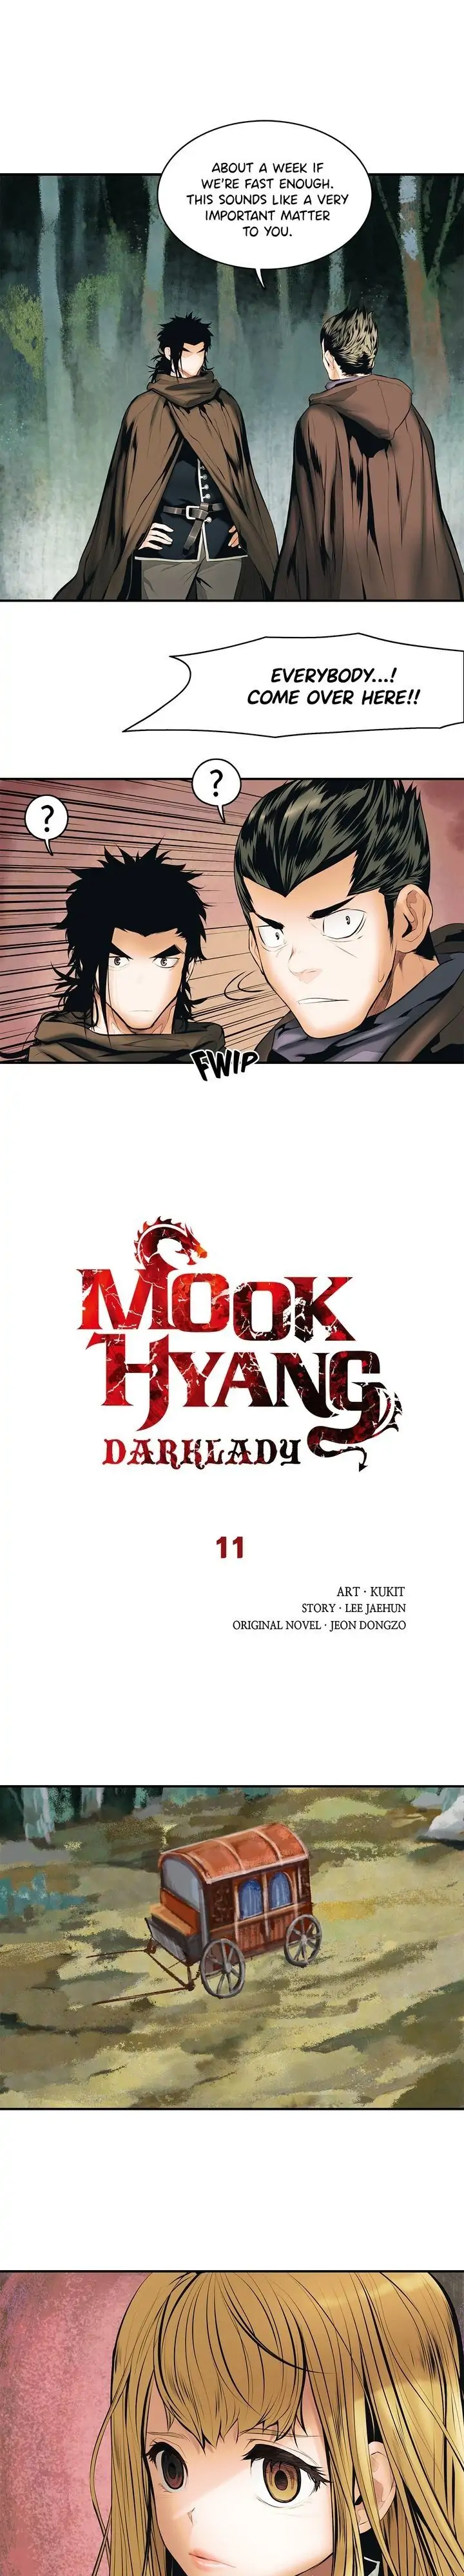 MookHyang – Dark Lady Chapter 11